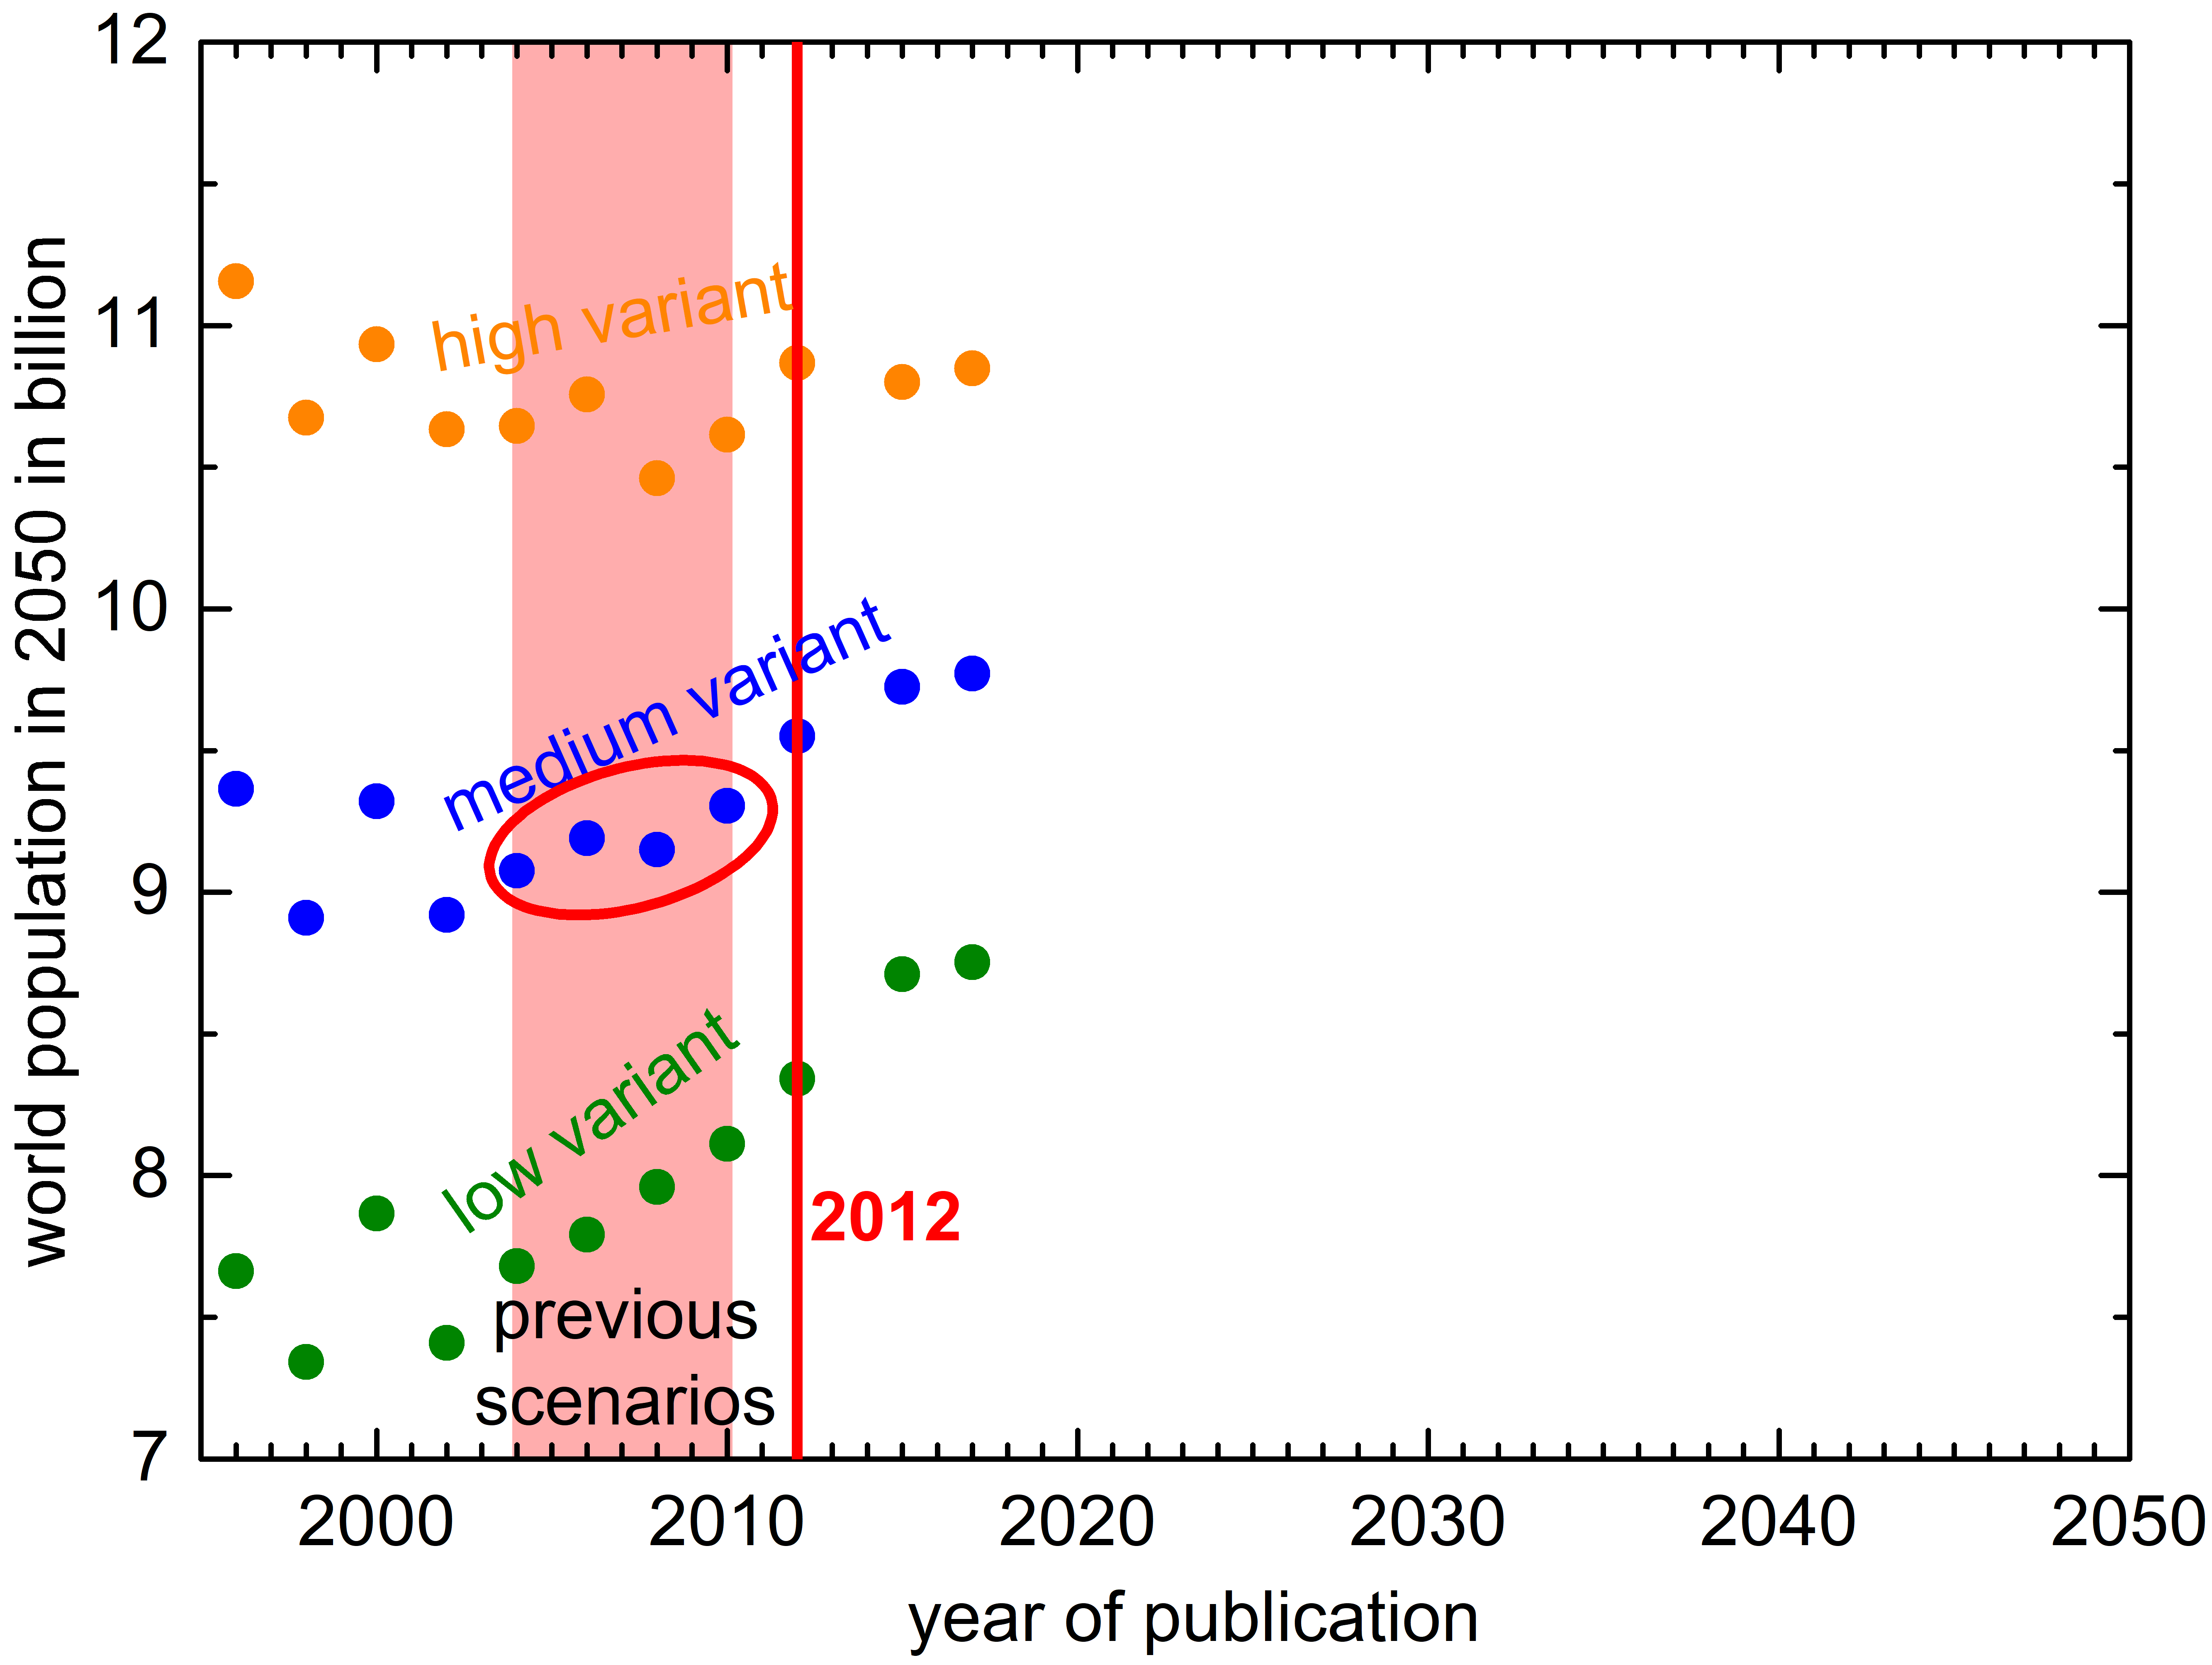 World population data according to the studies compared in Figure 6.1 of the 5th Assessment Report of the Intergovernmental Panel on Climate Change, data: UN World Population Prospects and earlier versions